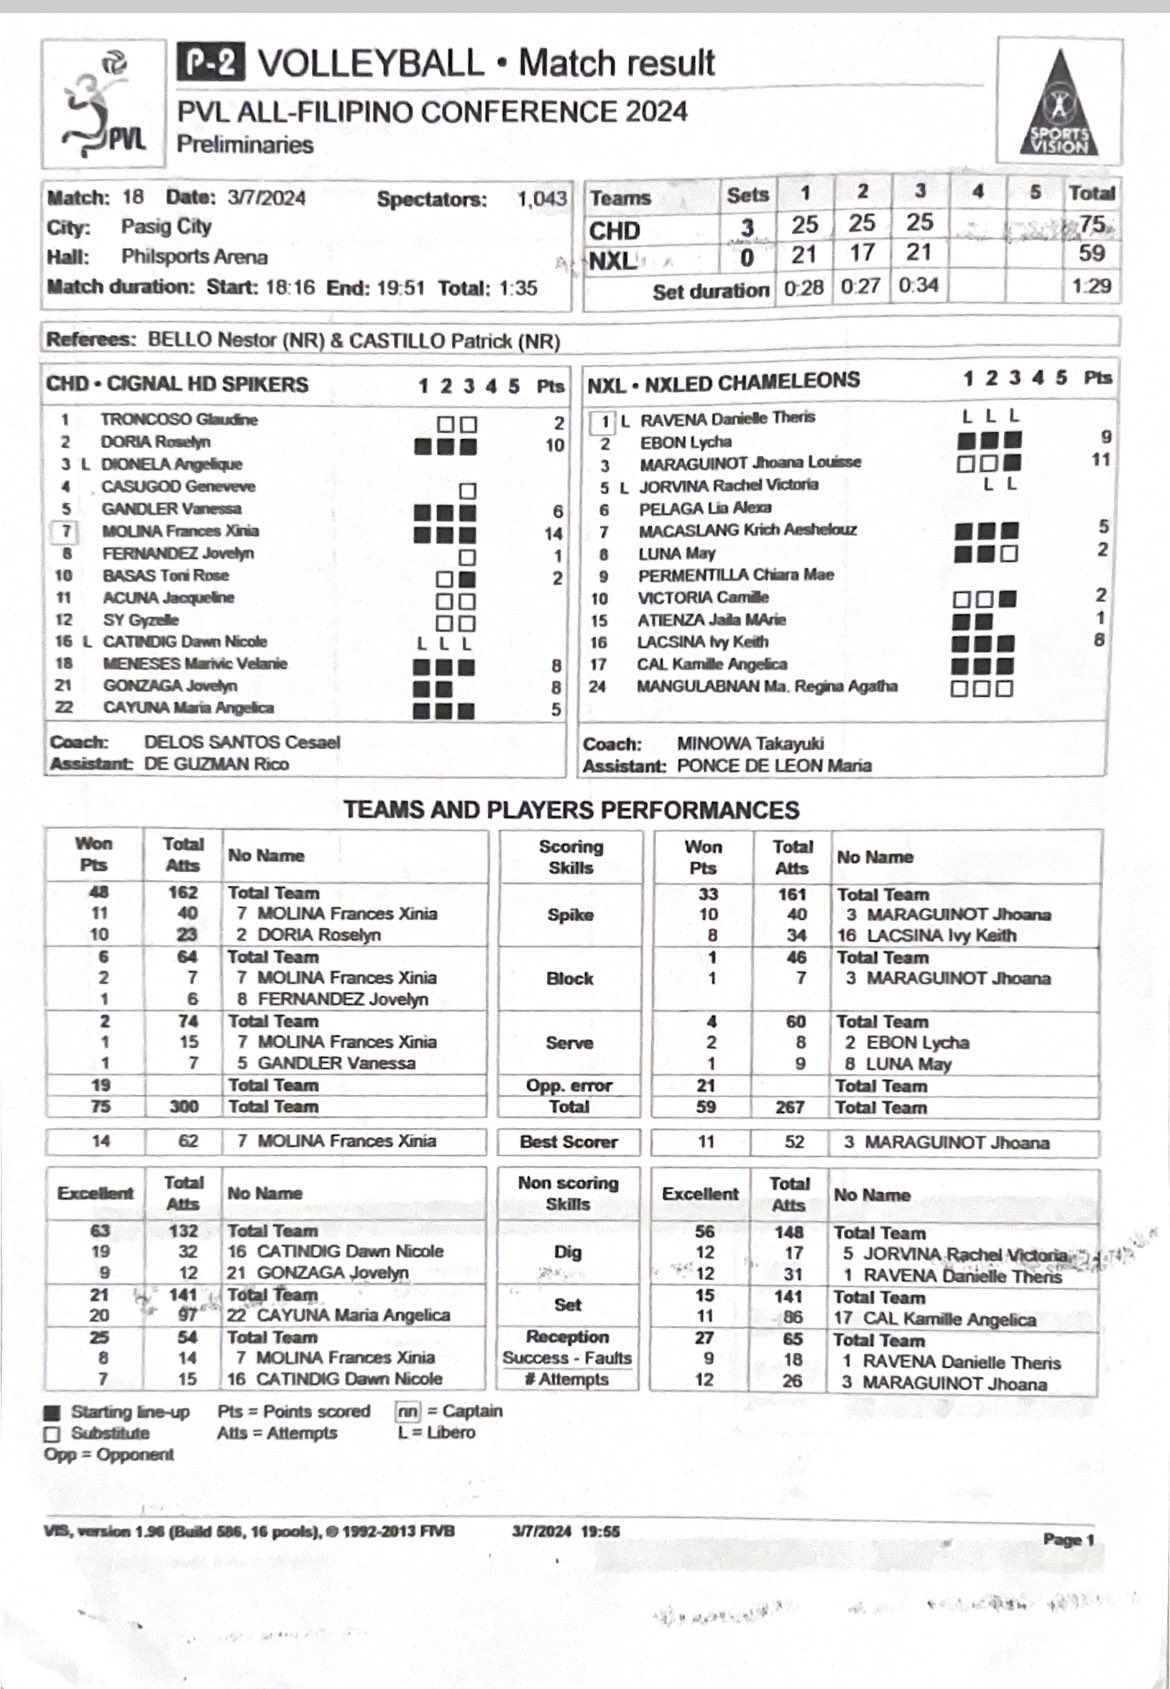 STATS: Cignal HD Spikers vs Nxled Chameleons (March 7)